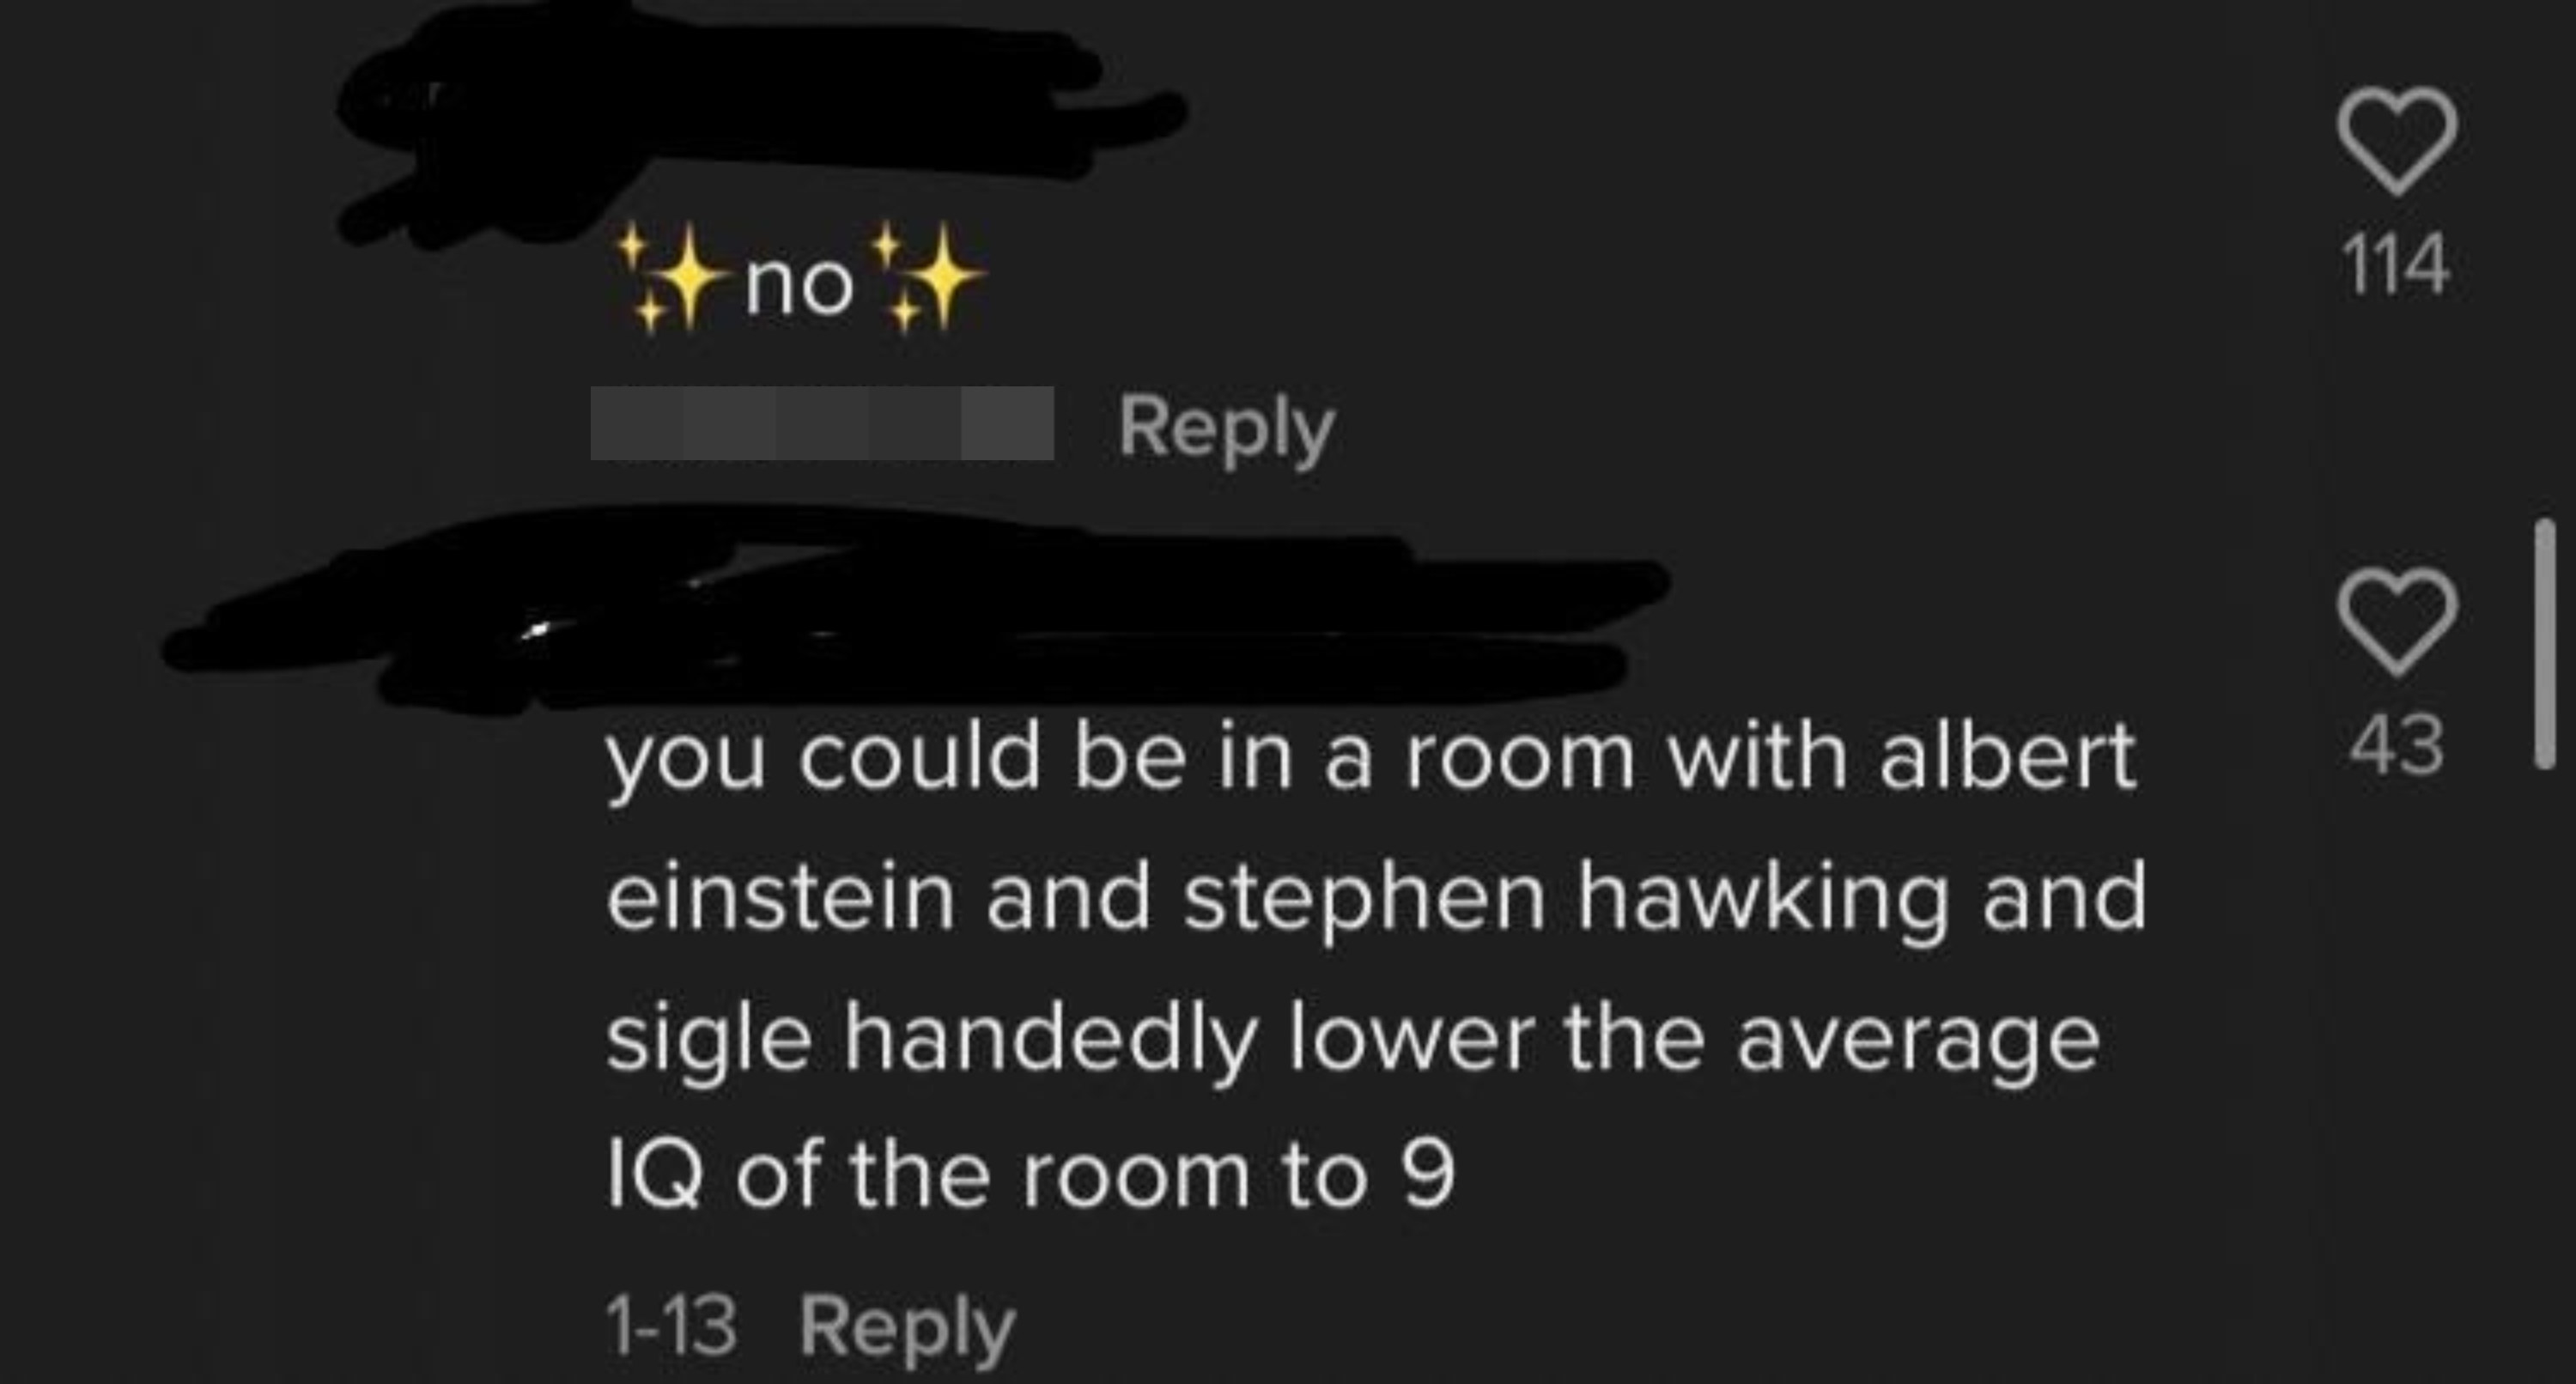 person saying if you were in a room with einstein and stephen hawking youd lower the iq to 9